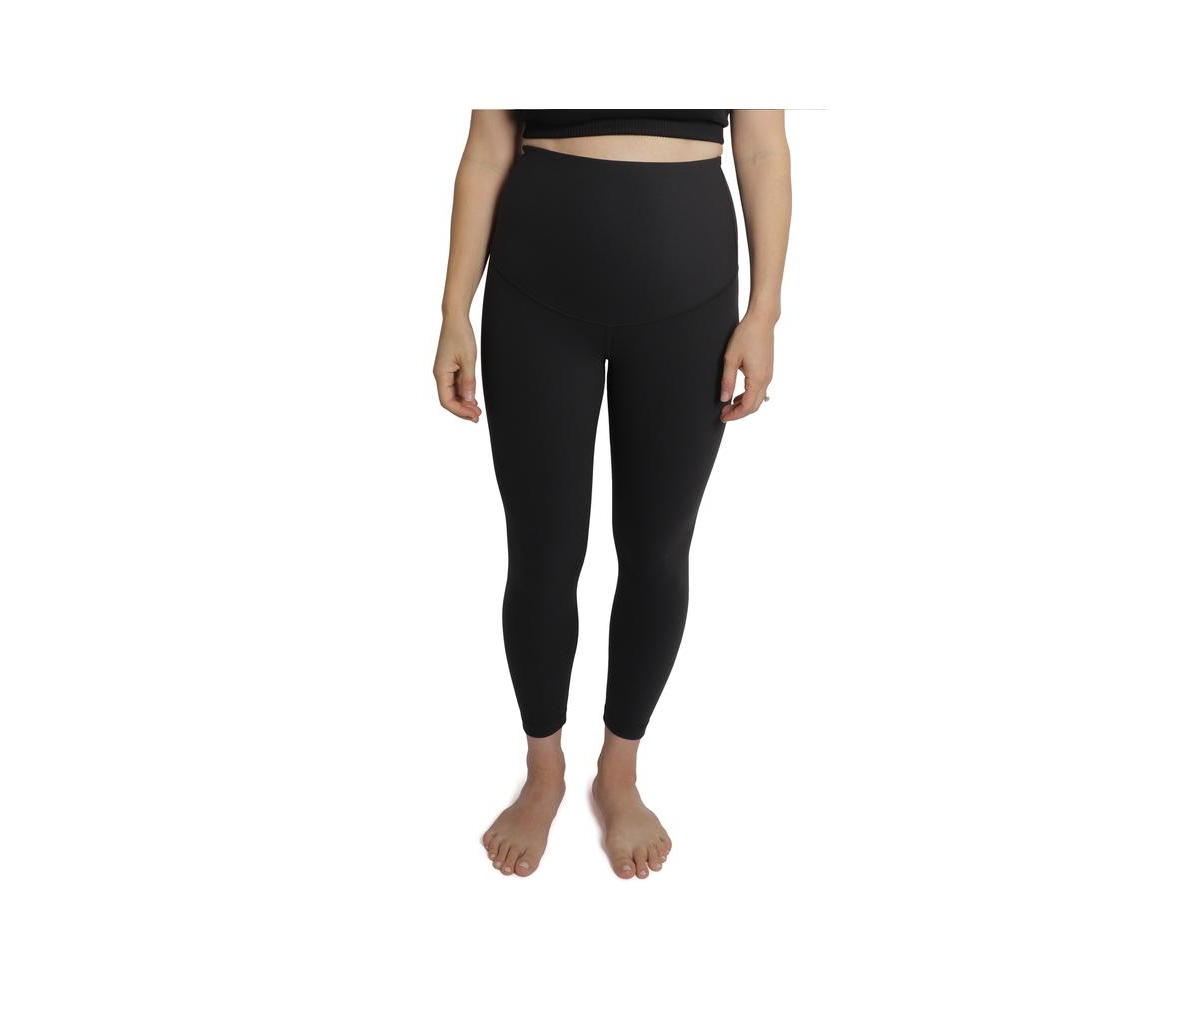 INGRID & ISABEL WOMEN'S MATERNITY POST ACTIVE LEGGING WITH CROSSOVER PANEL